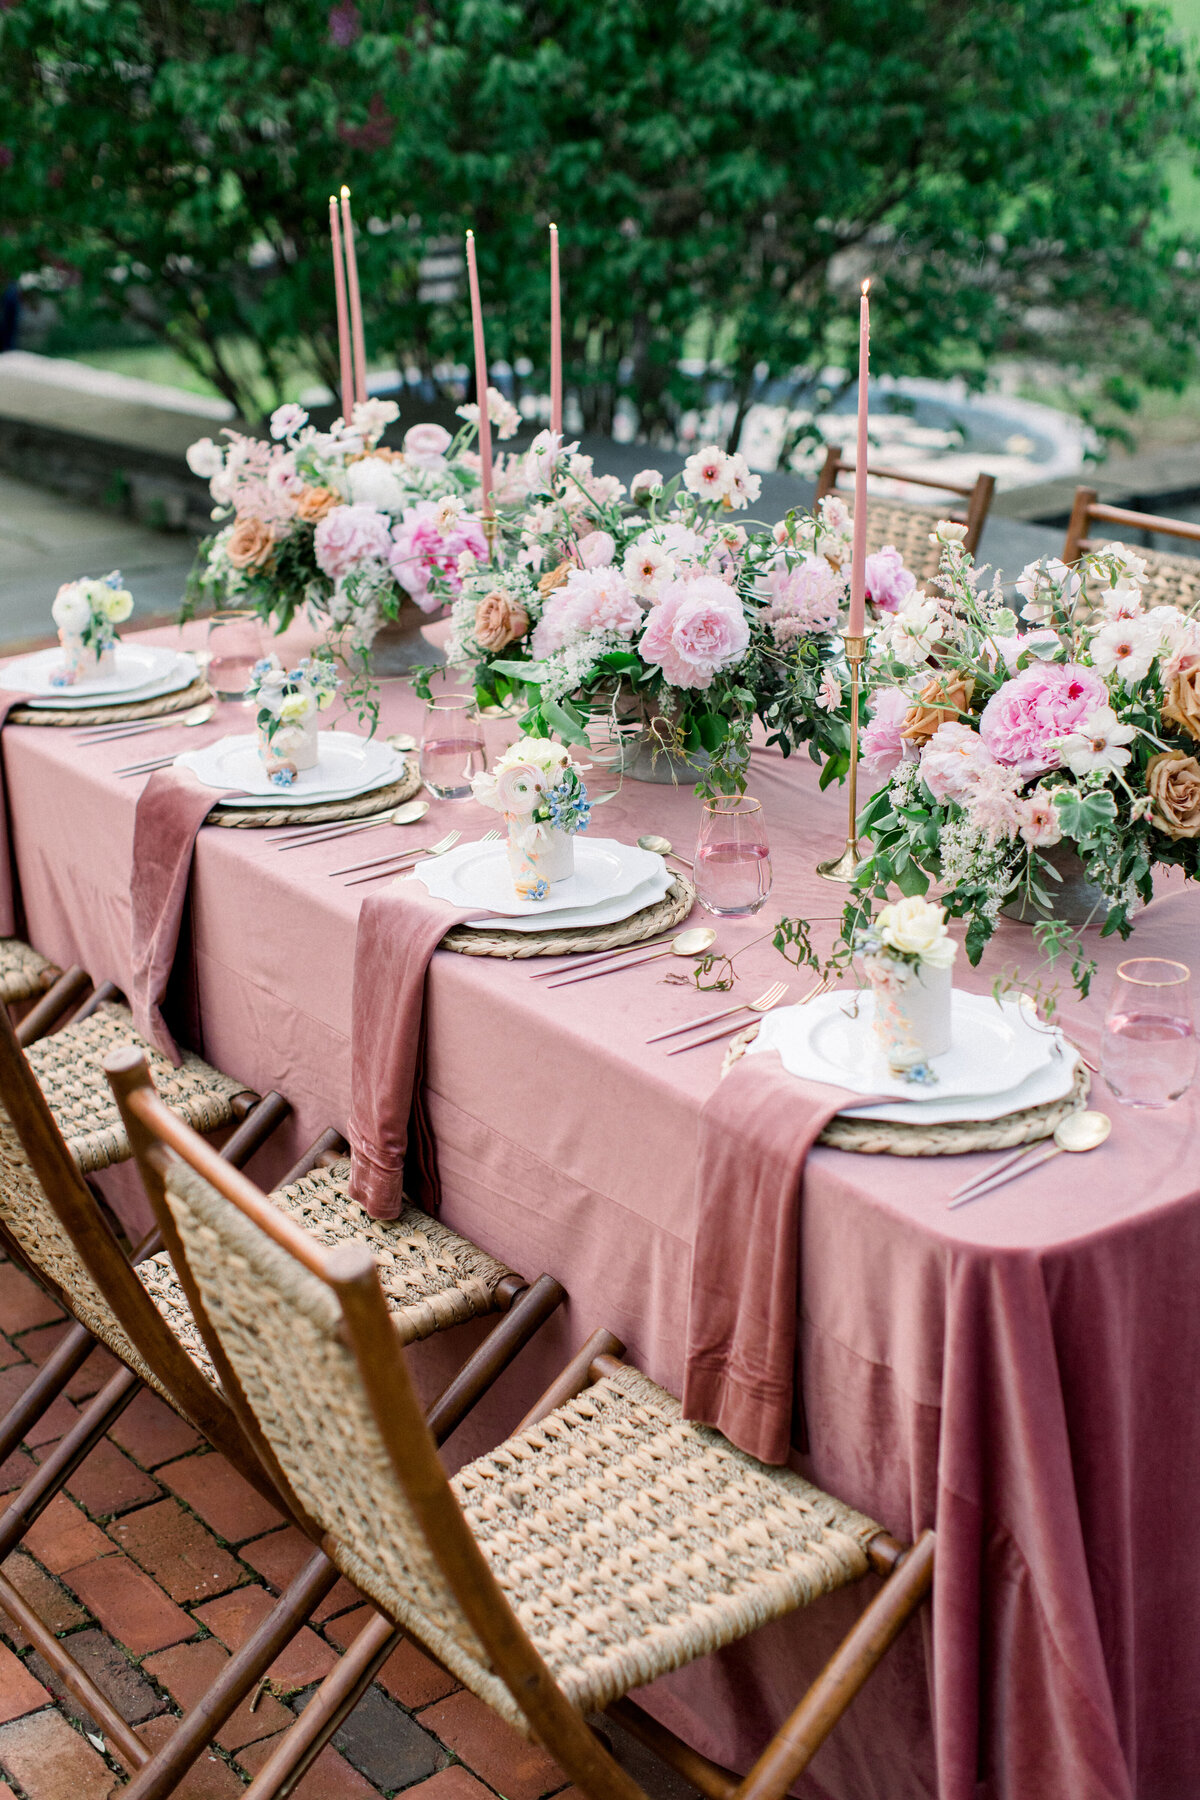 wedding rable with pink table cloth and naptkins with pin florals and candles